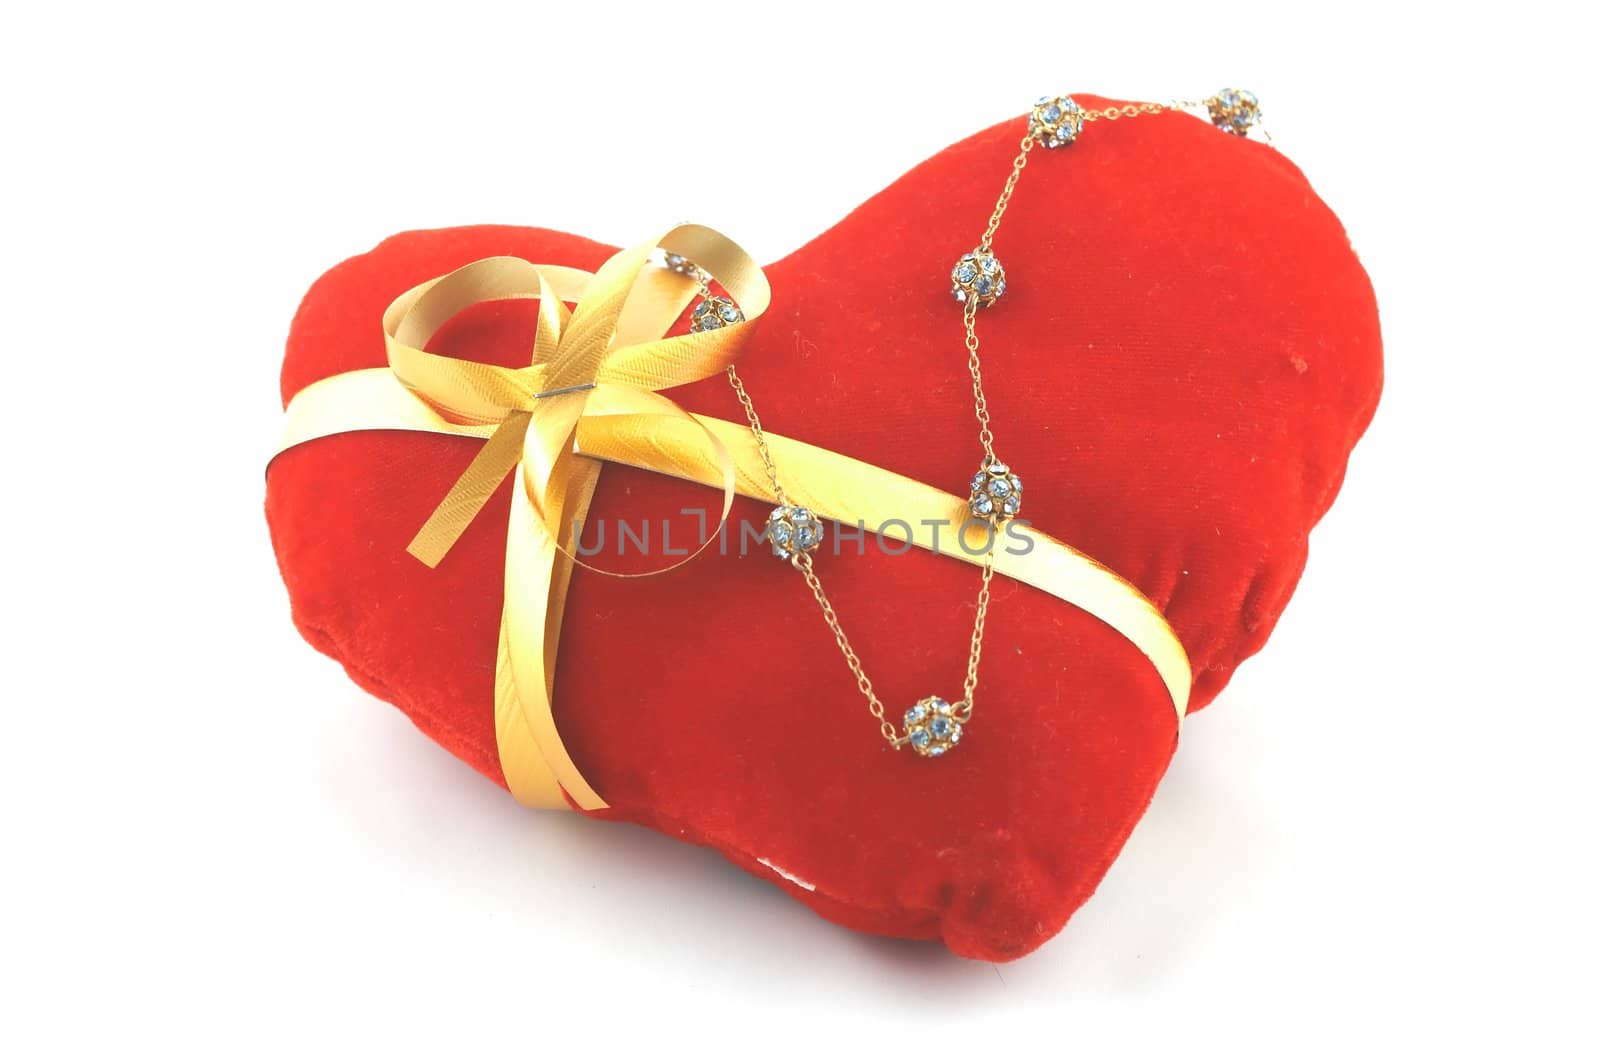 The heart which has been tied up by a tape with a bow. A gift on "Valentine's day"